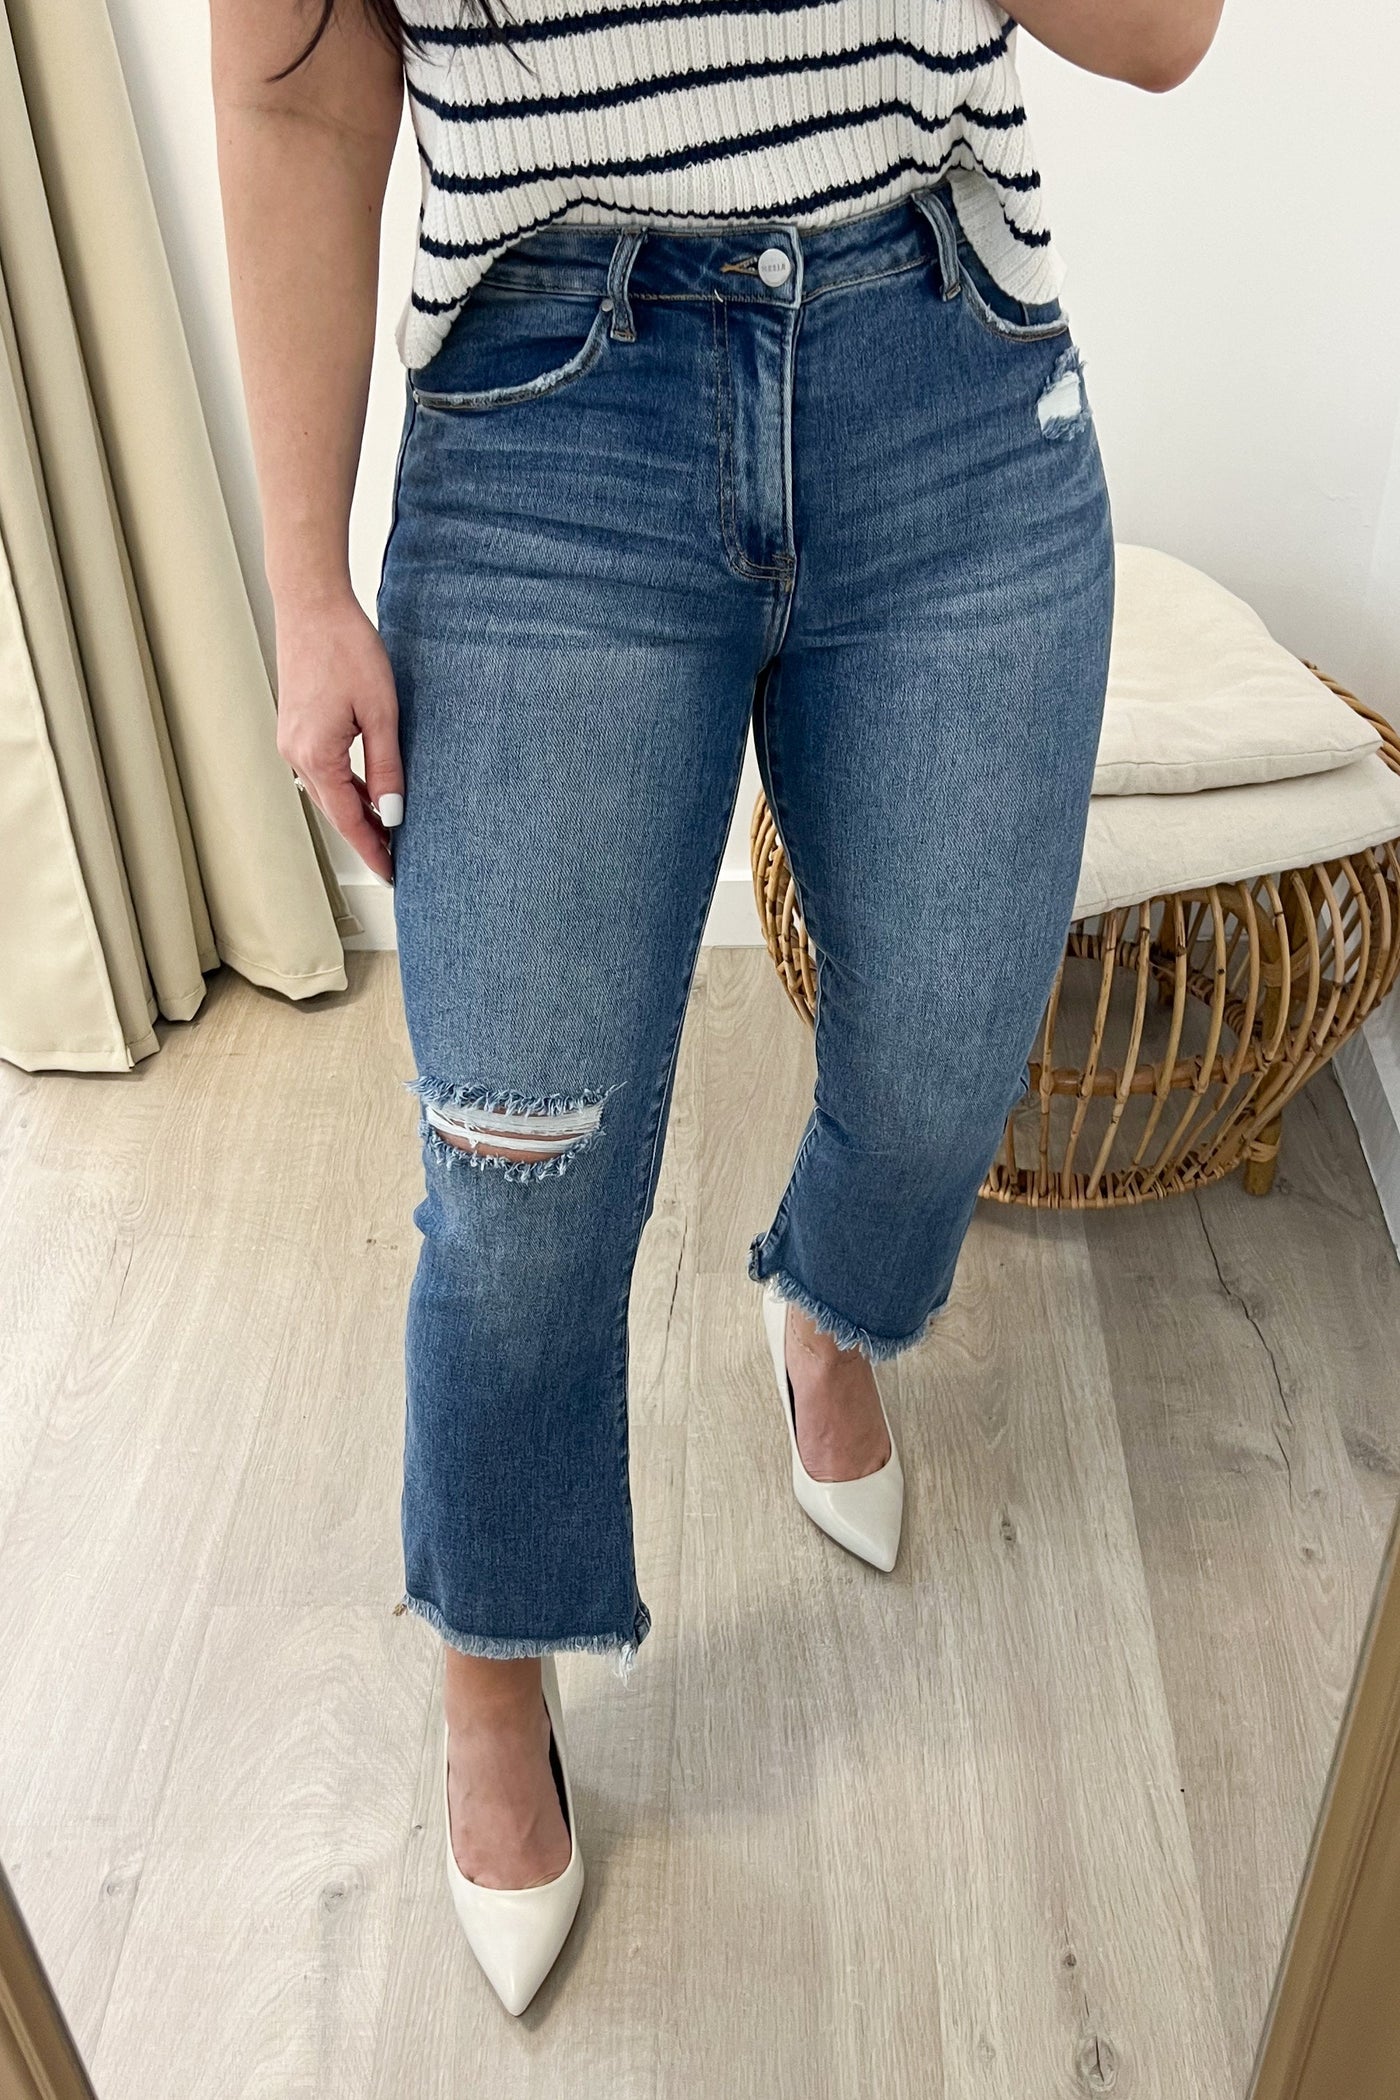 Haleigh Flare Jeans - Happily Ever Aften